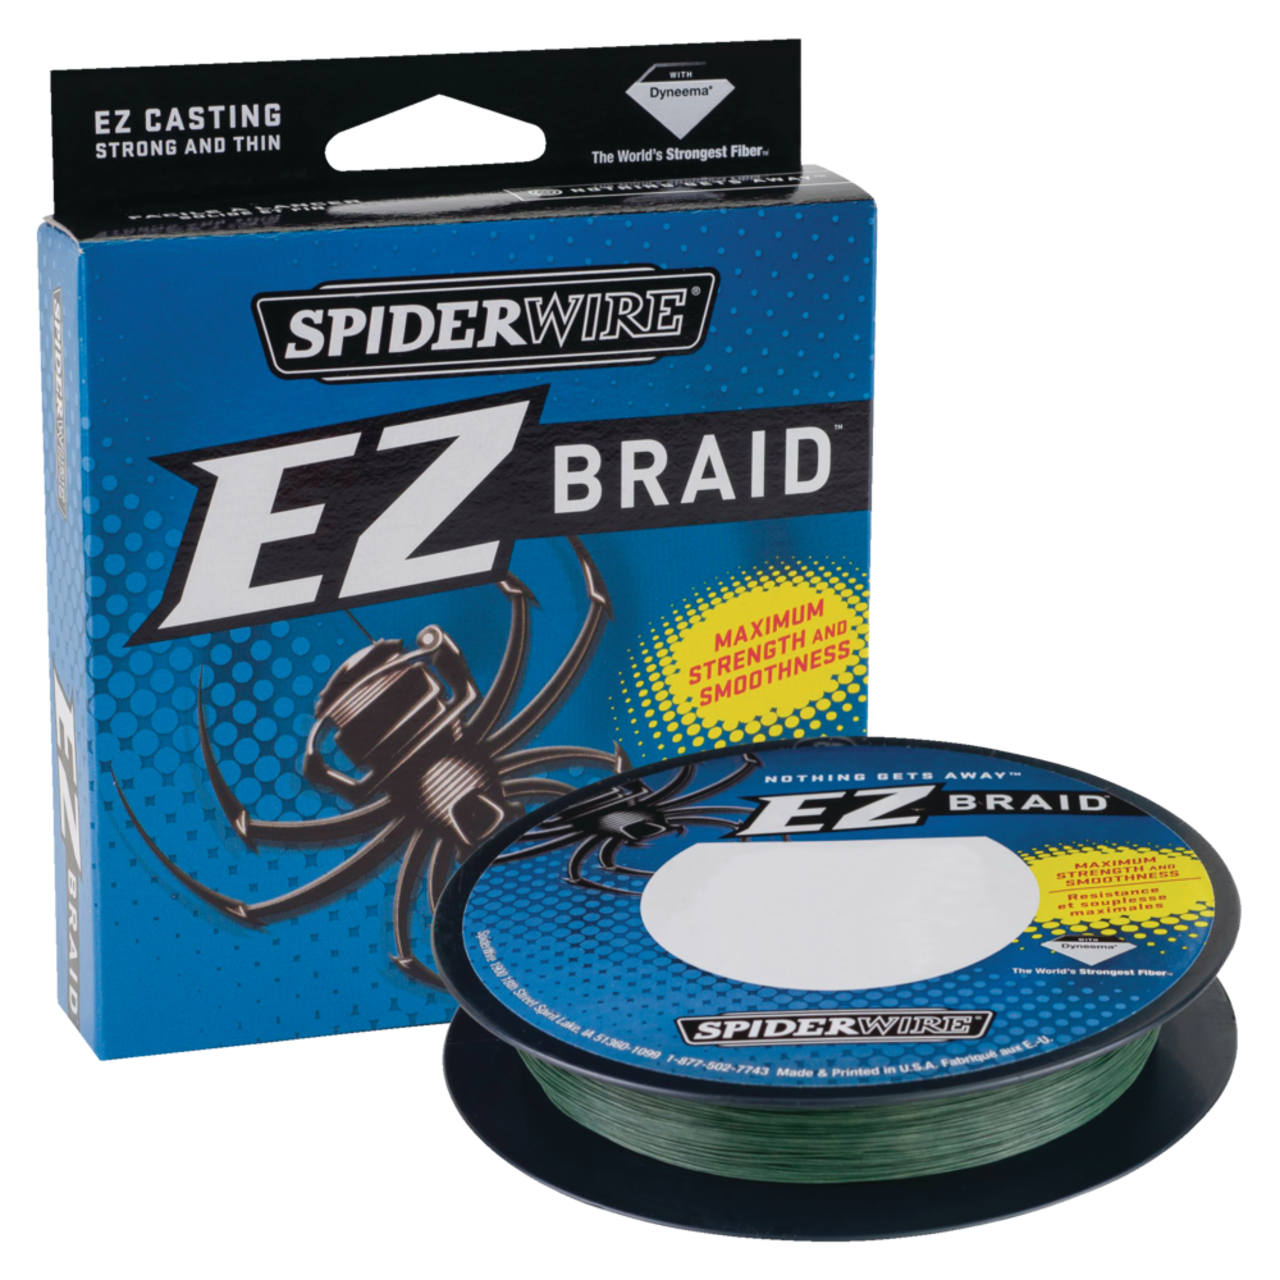 https://media-www.canadiantire.ca/product/playing/fishing/fishing-accessories/0782987/spiderwire-ez-braid-moss-green-15lb-110-yards-4c39f6bc-dea7-4c9b-9561-ab717cf79069.png?imdensity=1&imwidth=1244&impolicy=mZoom